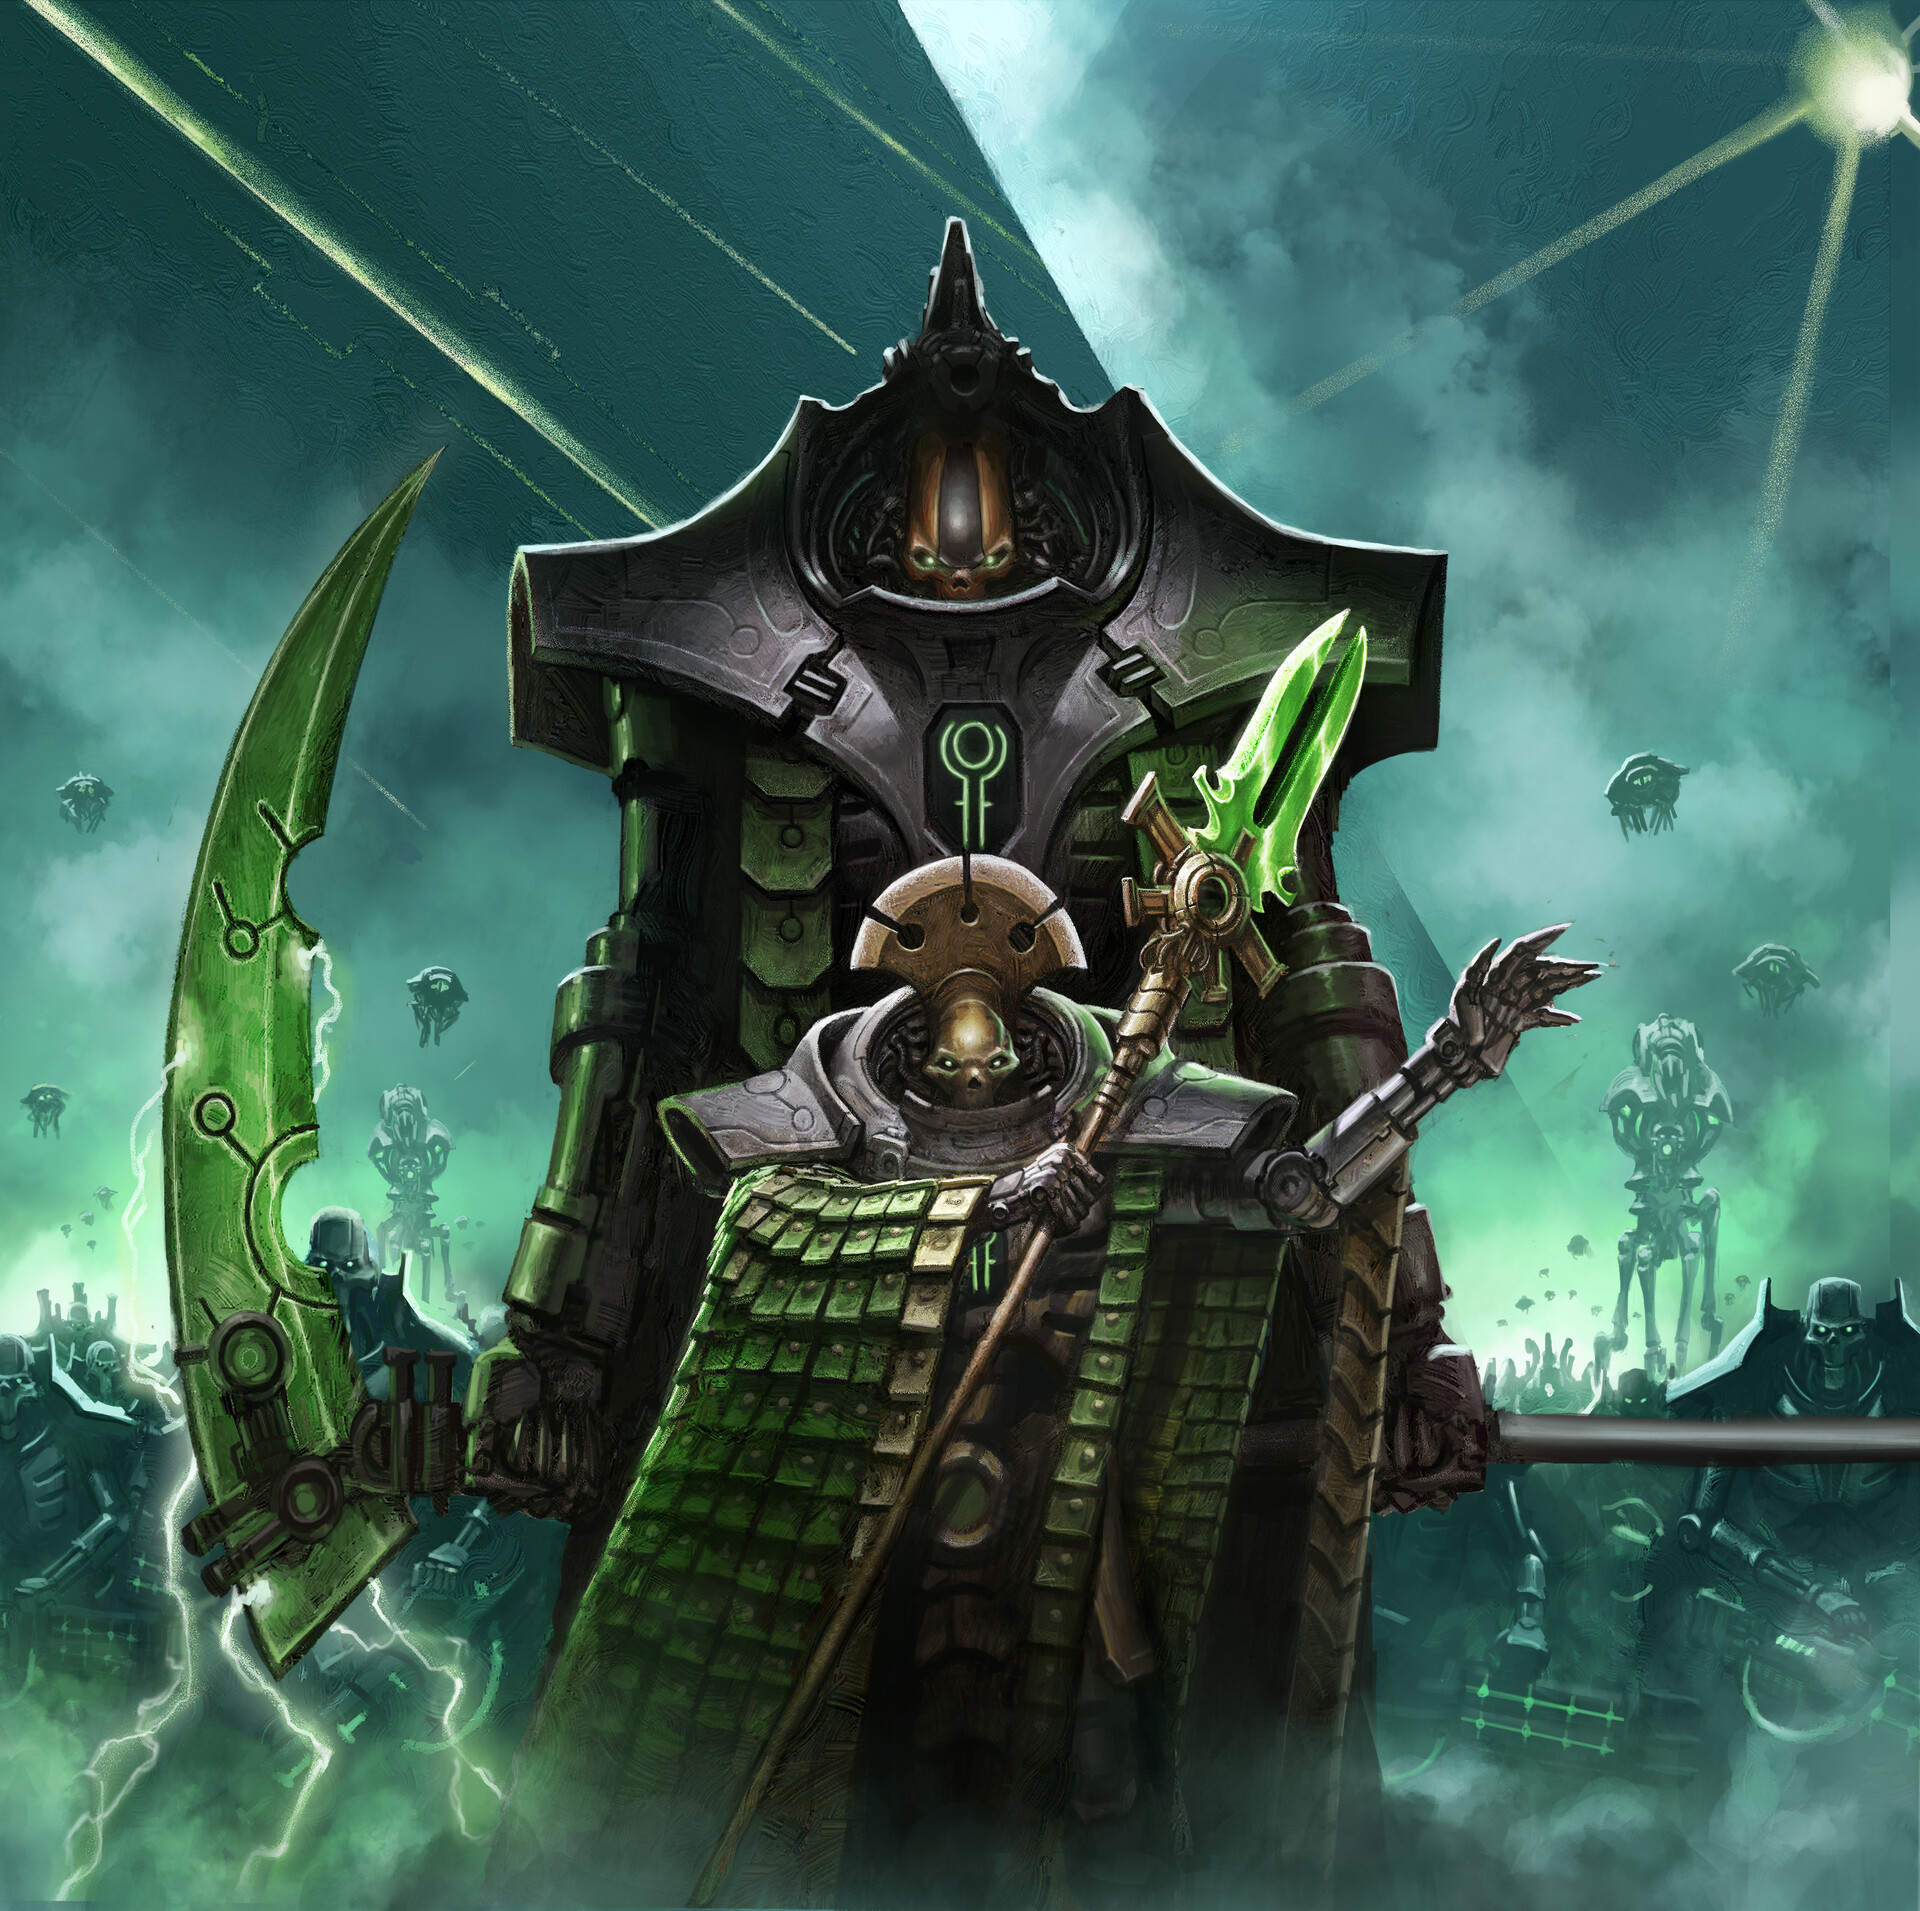 General 1920x1911 science fiction high tech Warhammer 40,000 Necrons gun green black tomb world cape army marching video games video game art video game characters